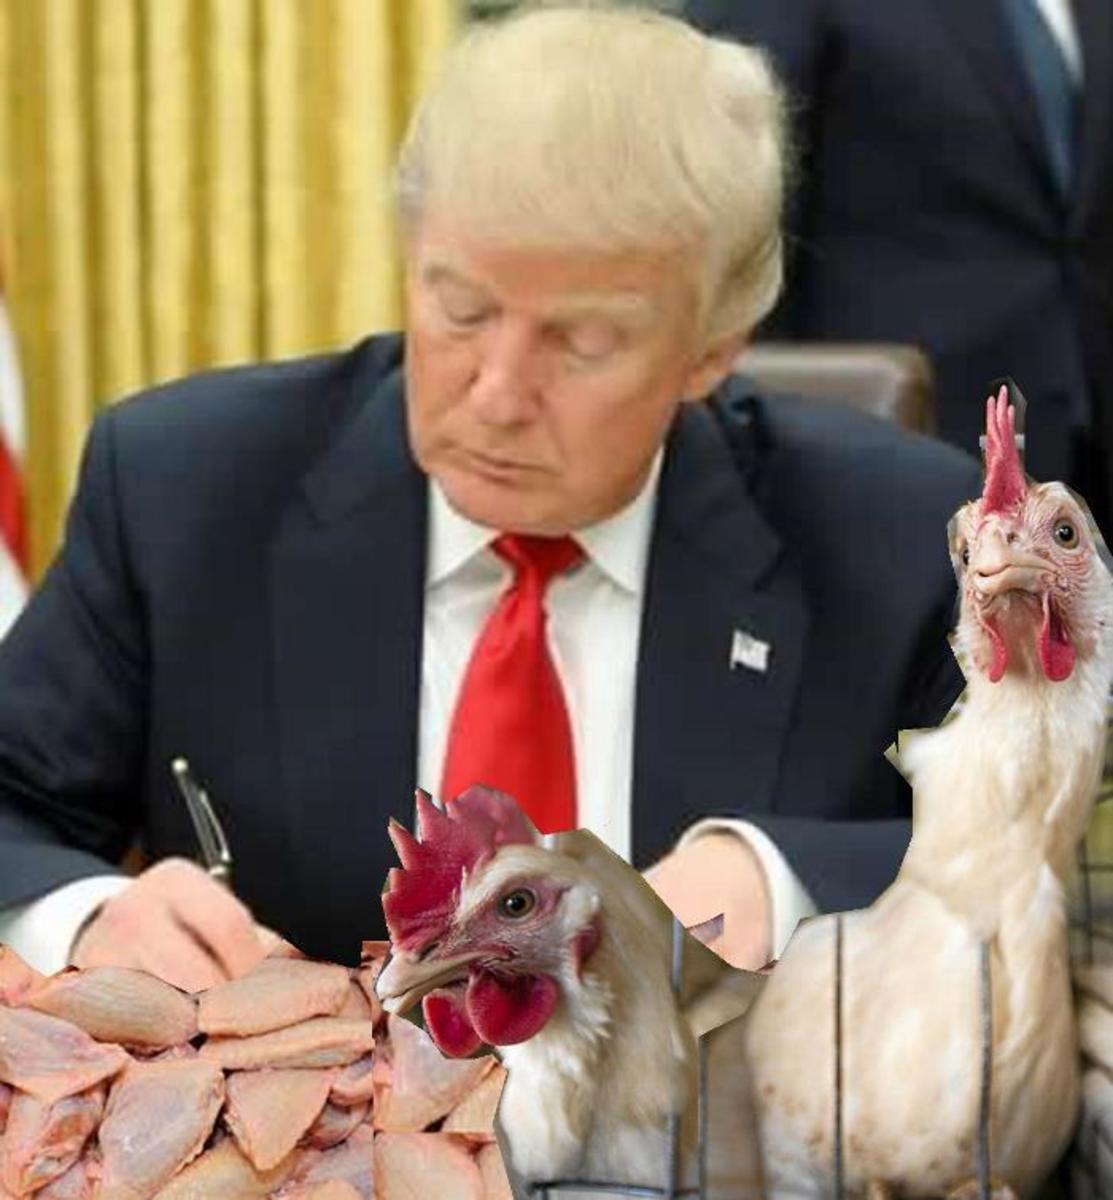 Inauguration of President Trump versus USA Chicken Dumping in South Africa